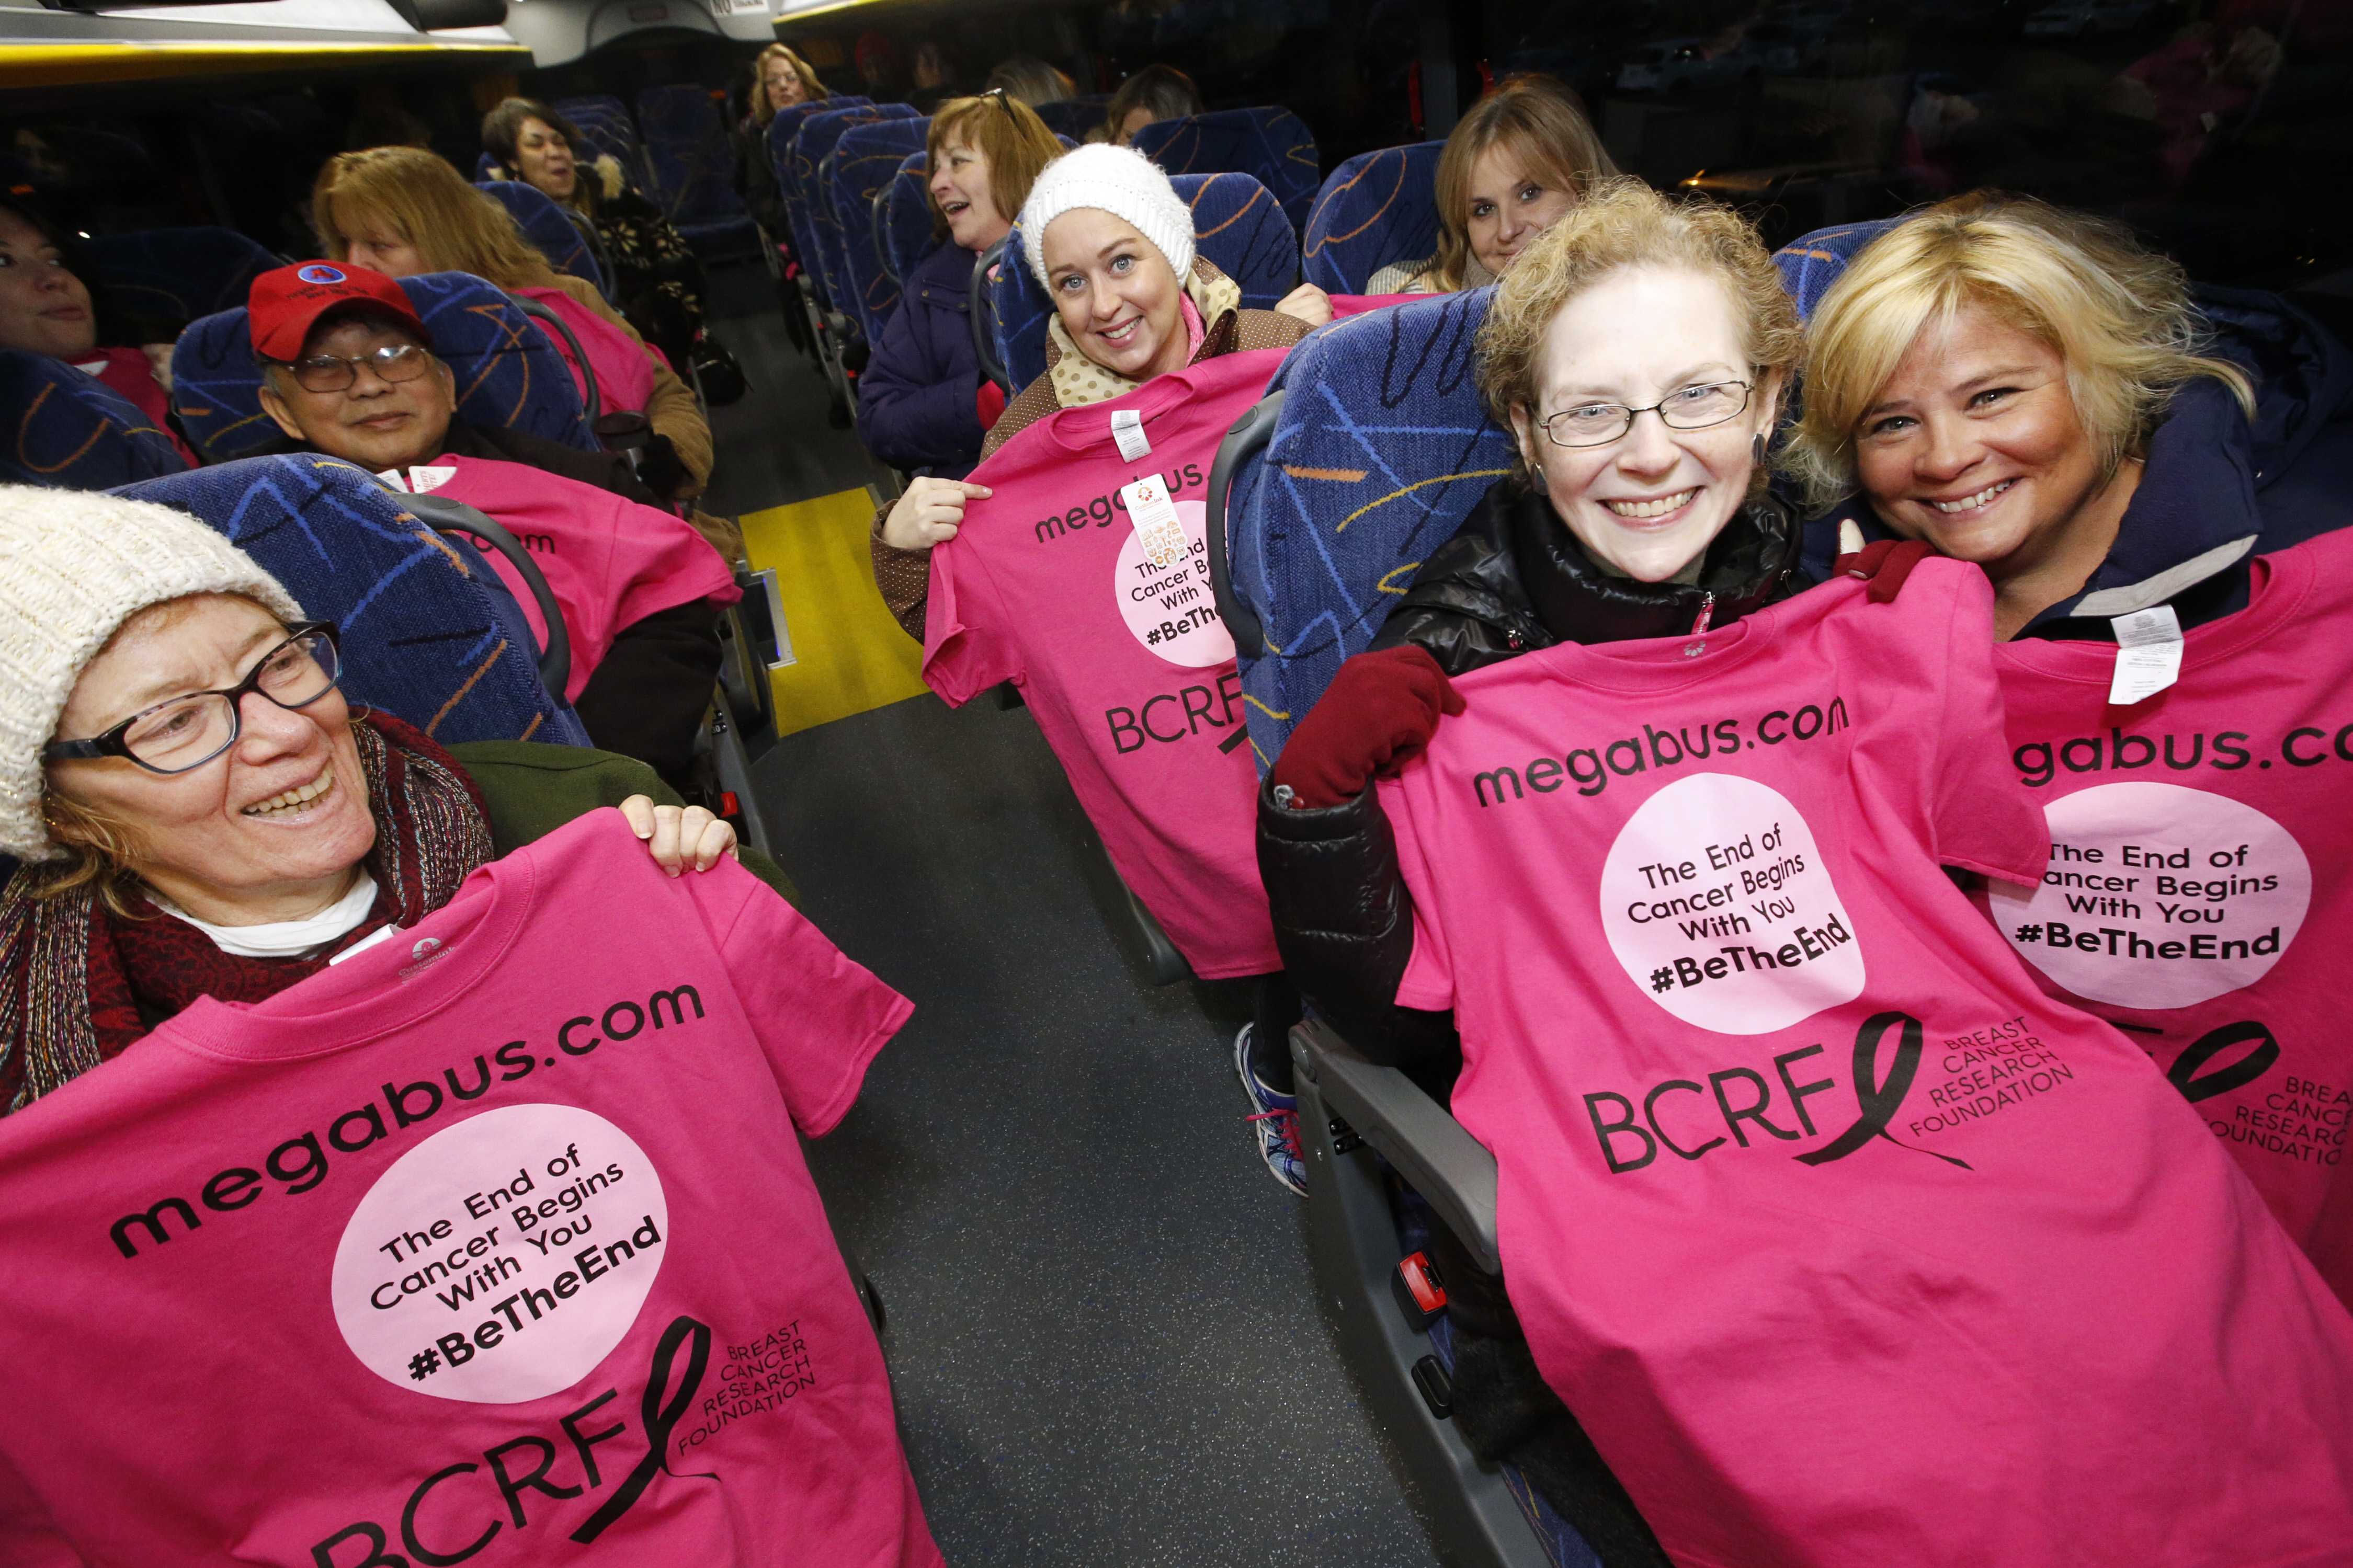 Megabus.com and Breast Cancer Research Foundation Partnership Announcement